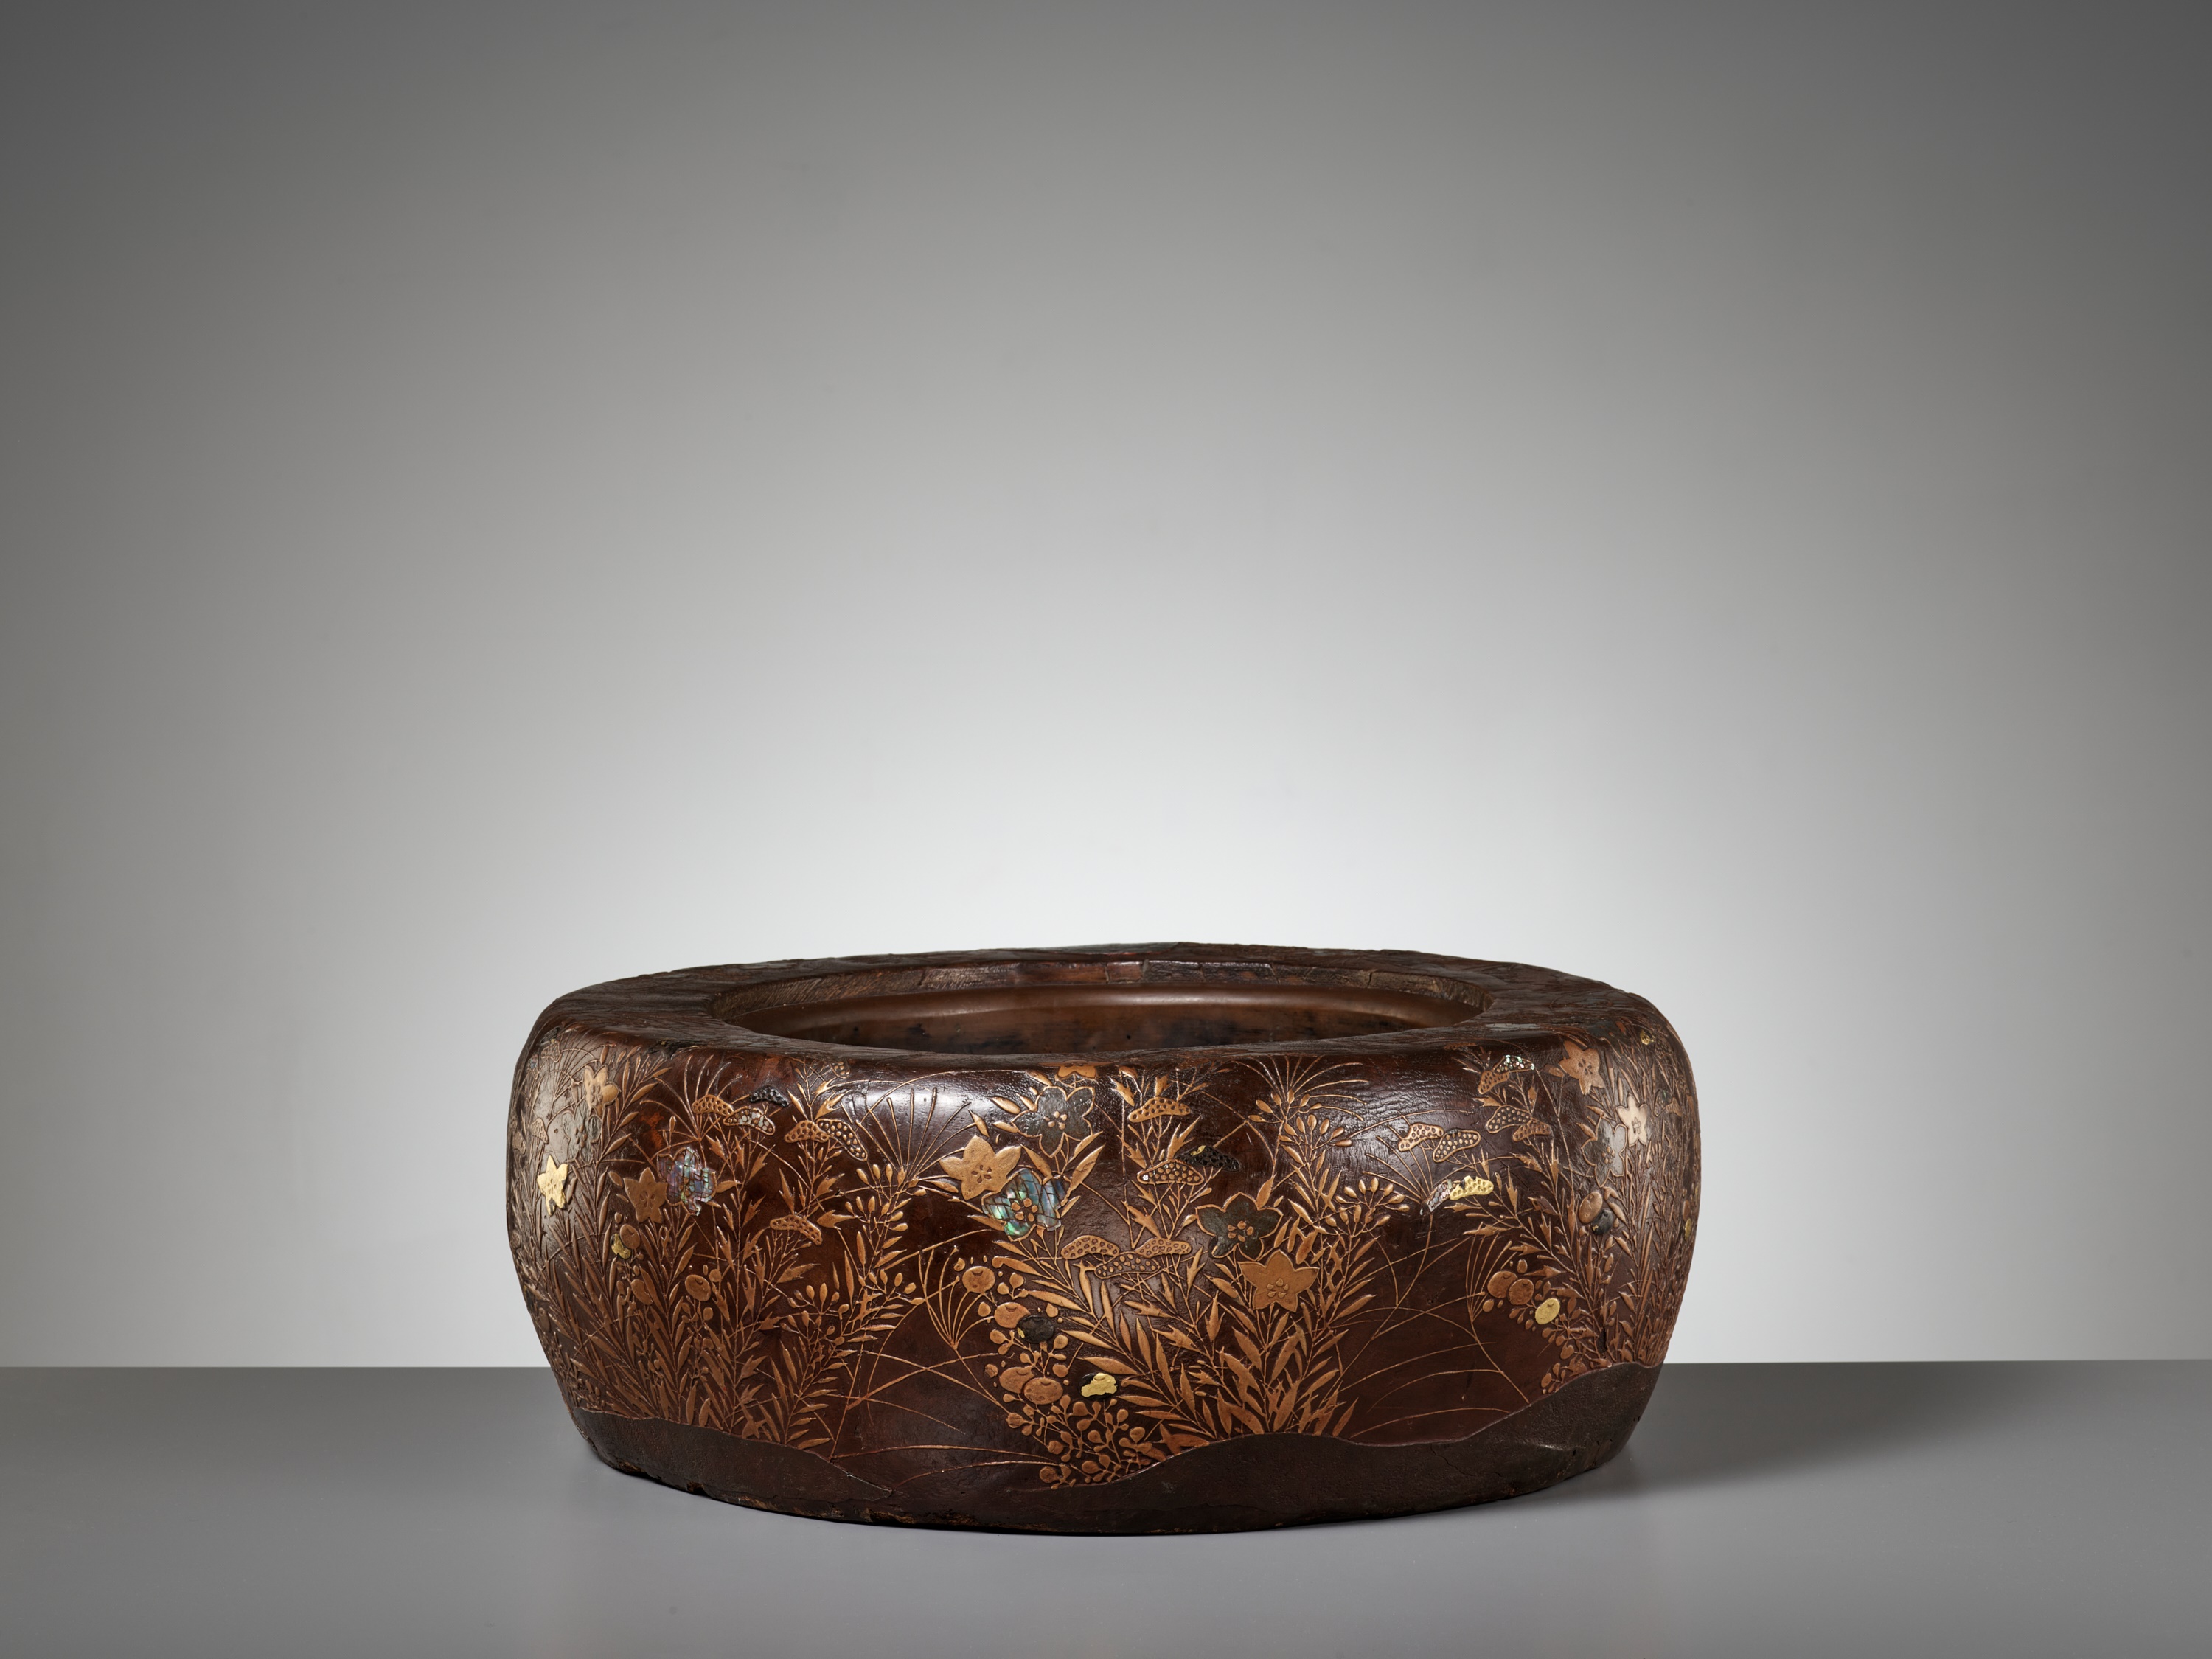 A LARGE RIMPA STYLE LACQUERED AND INLAID PAULOWNIA WOOD HIBACHI (BRAZIER) WITH LUNAR HARES - Image 7 of 14